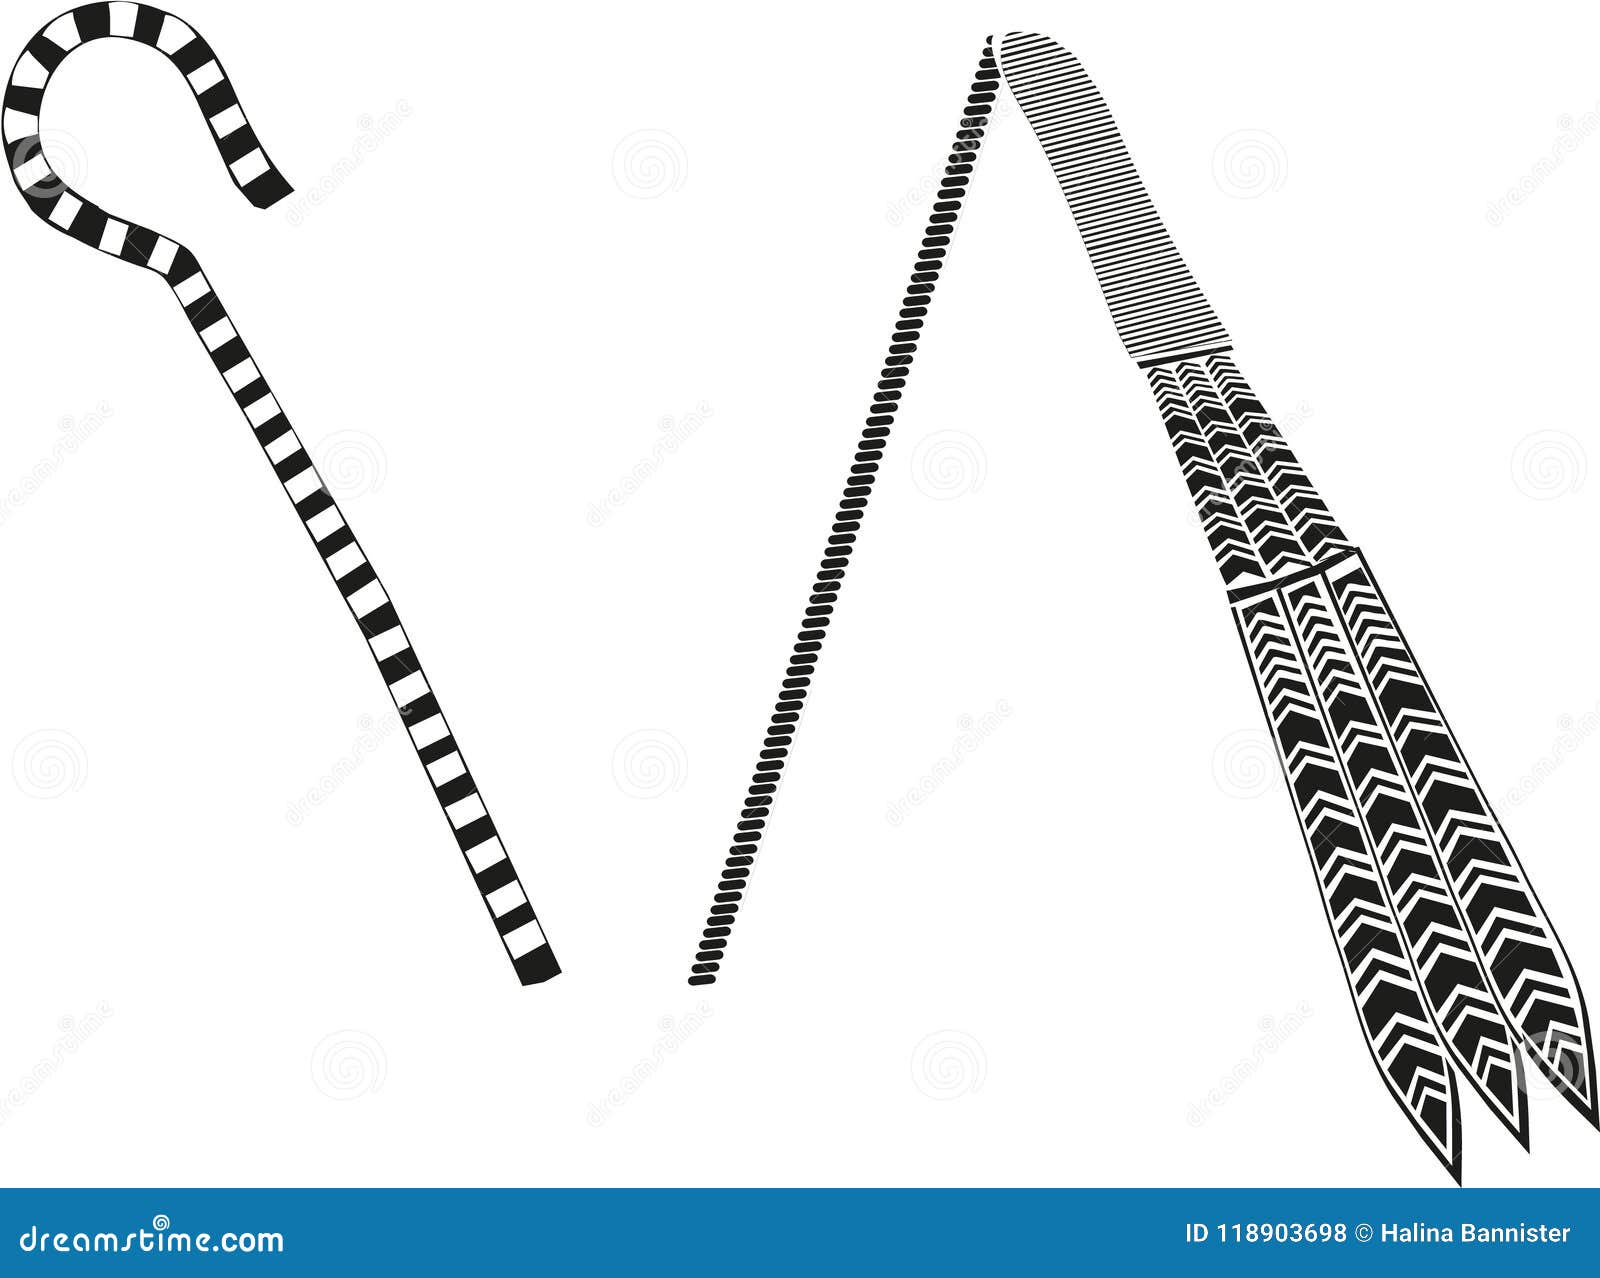 Crook and Flail Silhouette stock illustration. Illustration of symbols